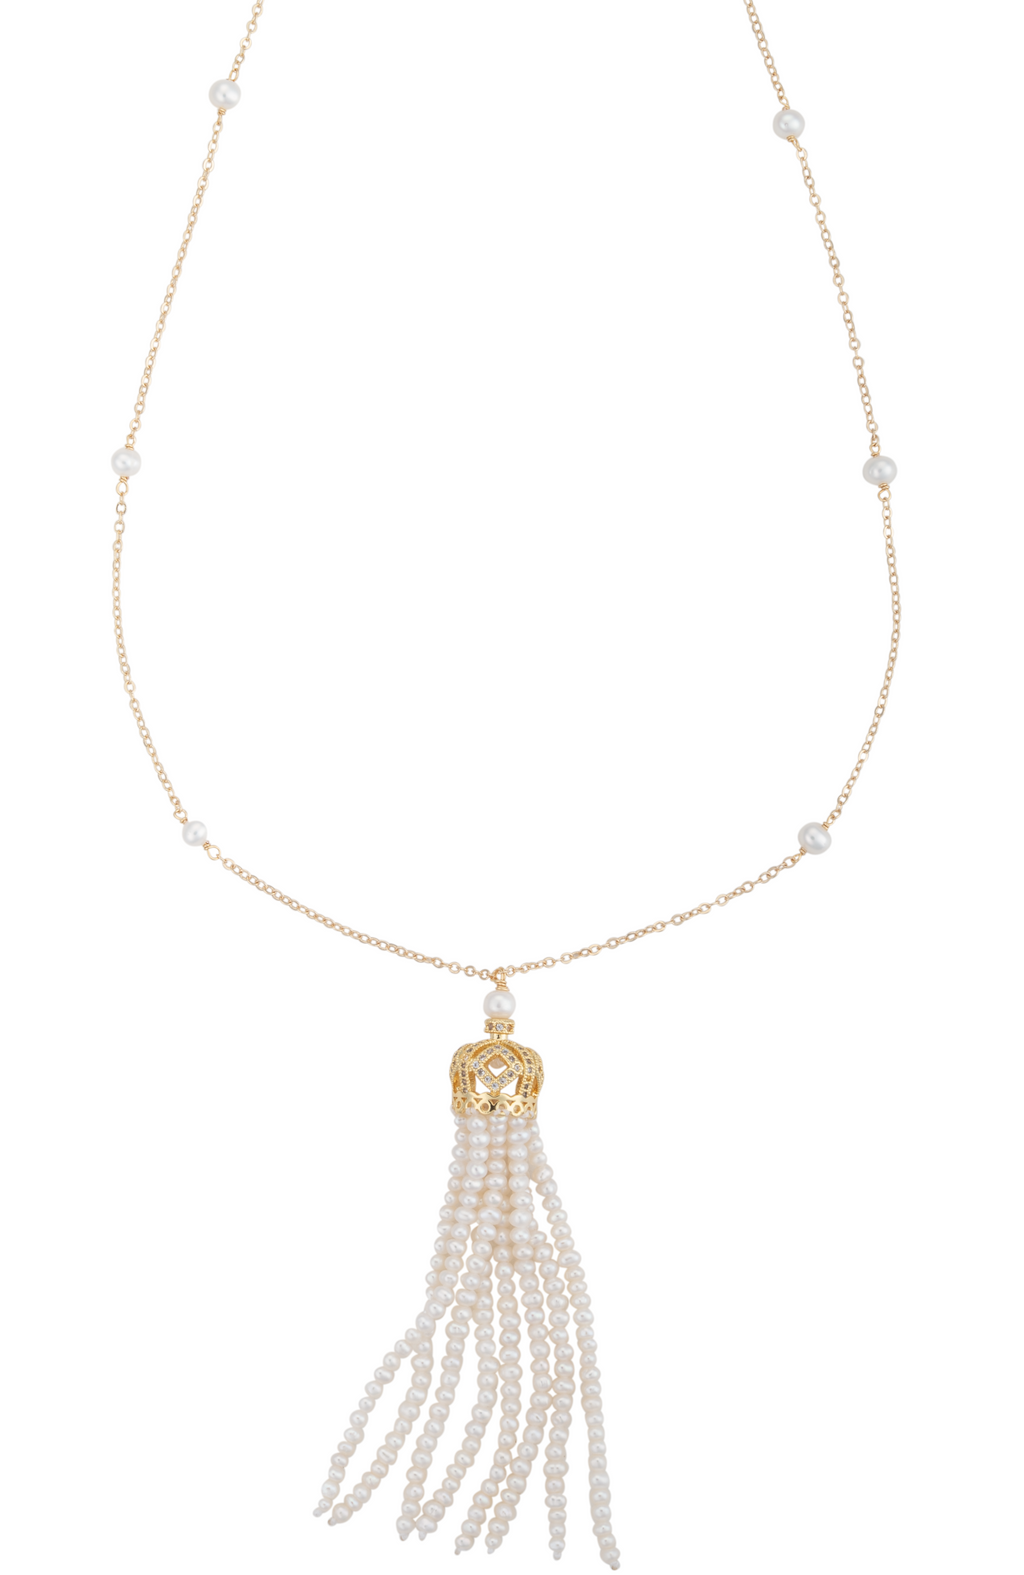 An image of a long gold and white freshwater cultured pearl tassel necklace